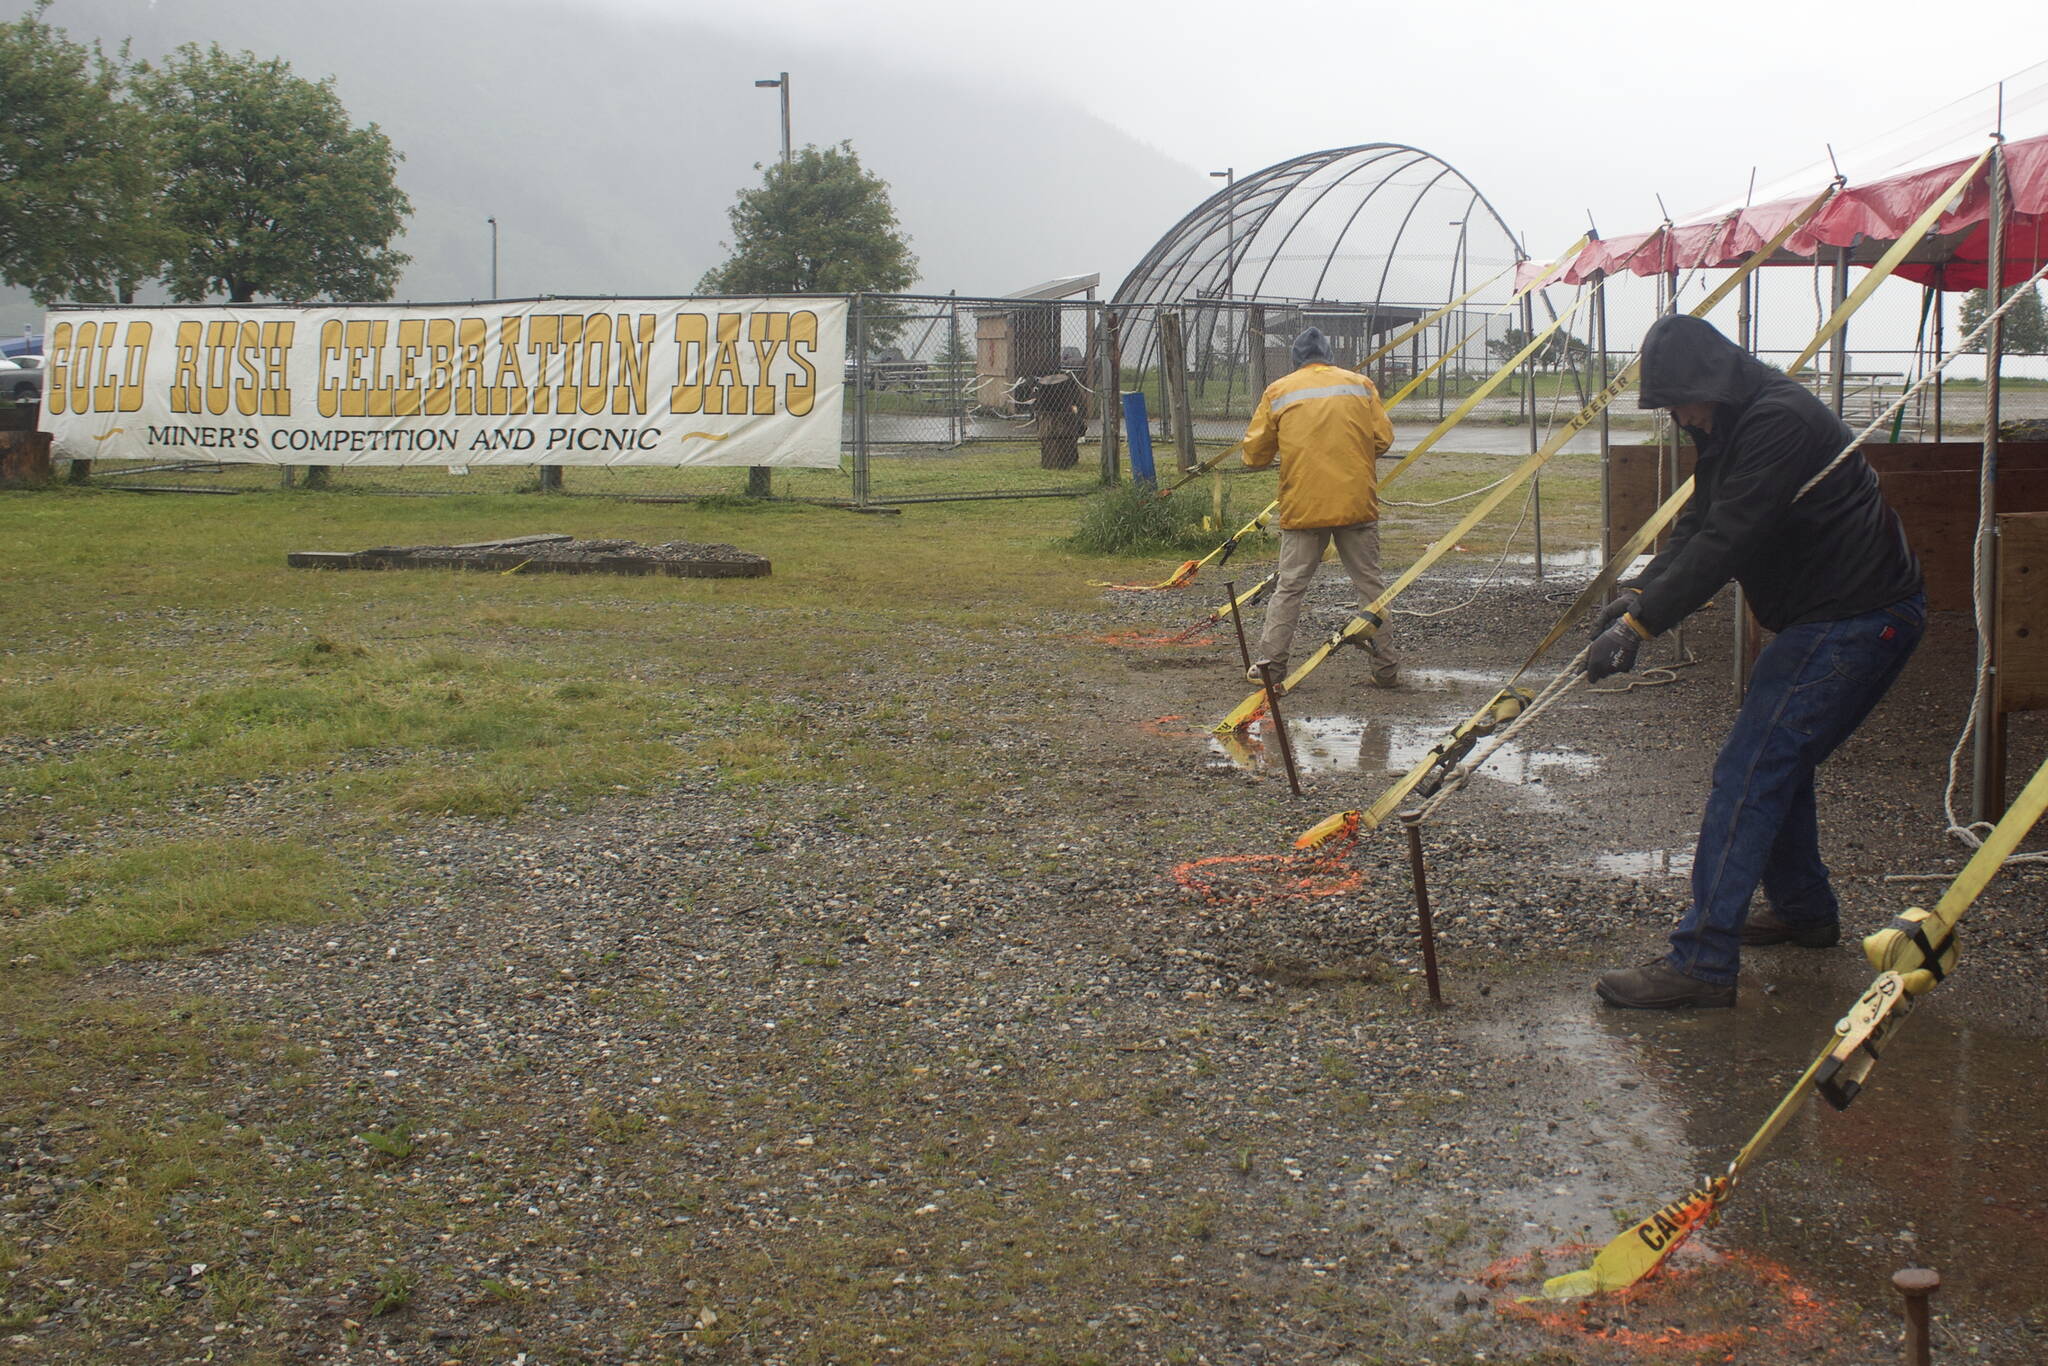 Gabe Holst, foreground, a Coeur Alaska Inc. mining intern from Springfield, Missouri, tightens an anchor rope on a shelter tent at Savikko Field on Monday where vendors will be during Juneau Gold Rush Days. (Mark Sabbatini / Juneau Empire)